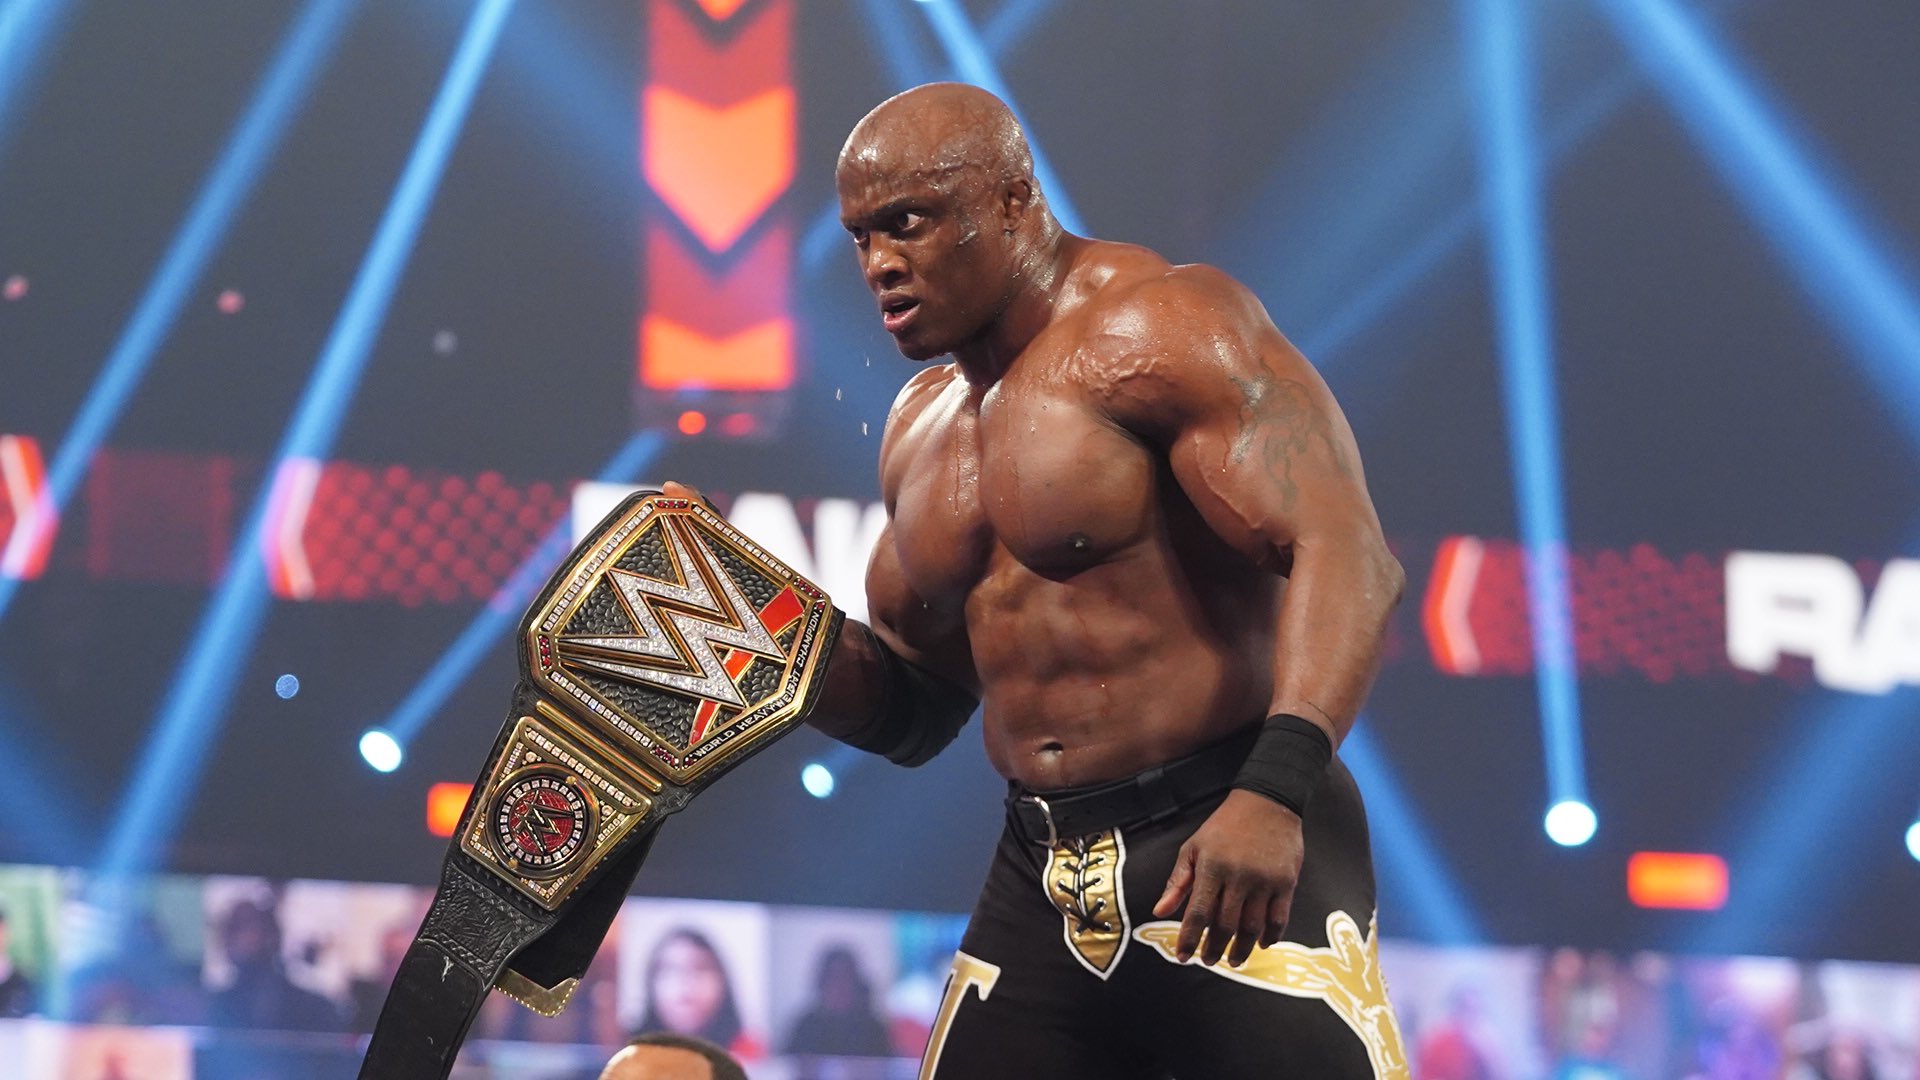 Bobby Lashley Talks About Impact Wrestling And His Favorites Wwe